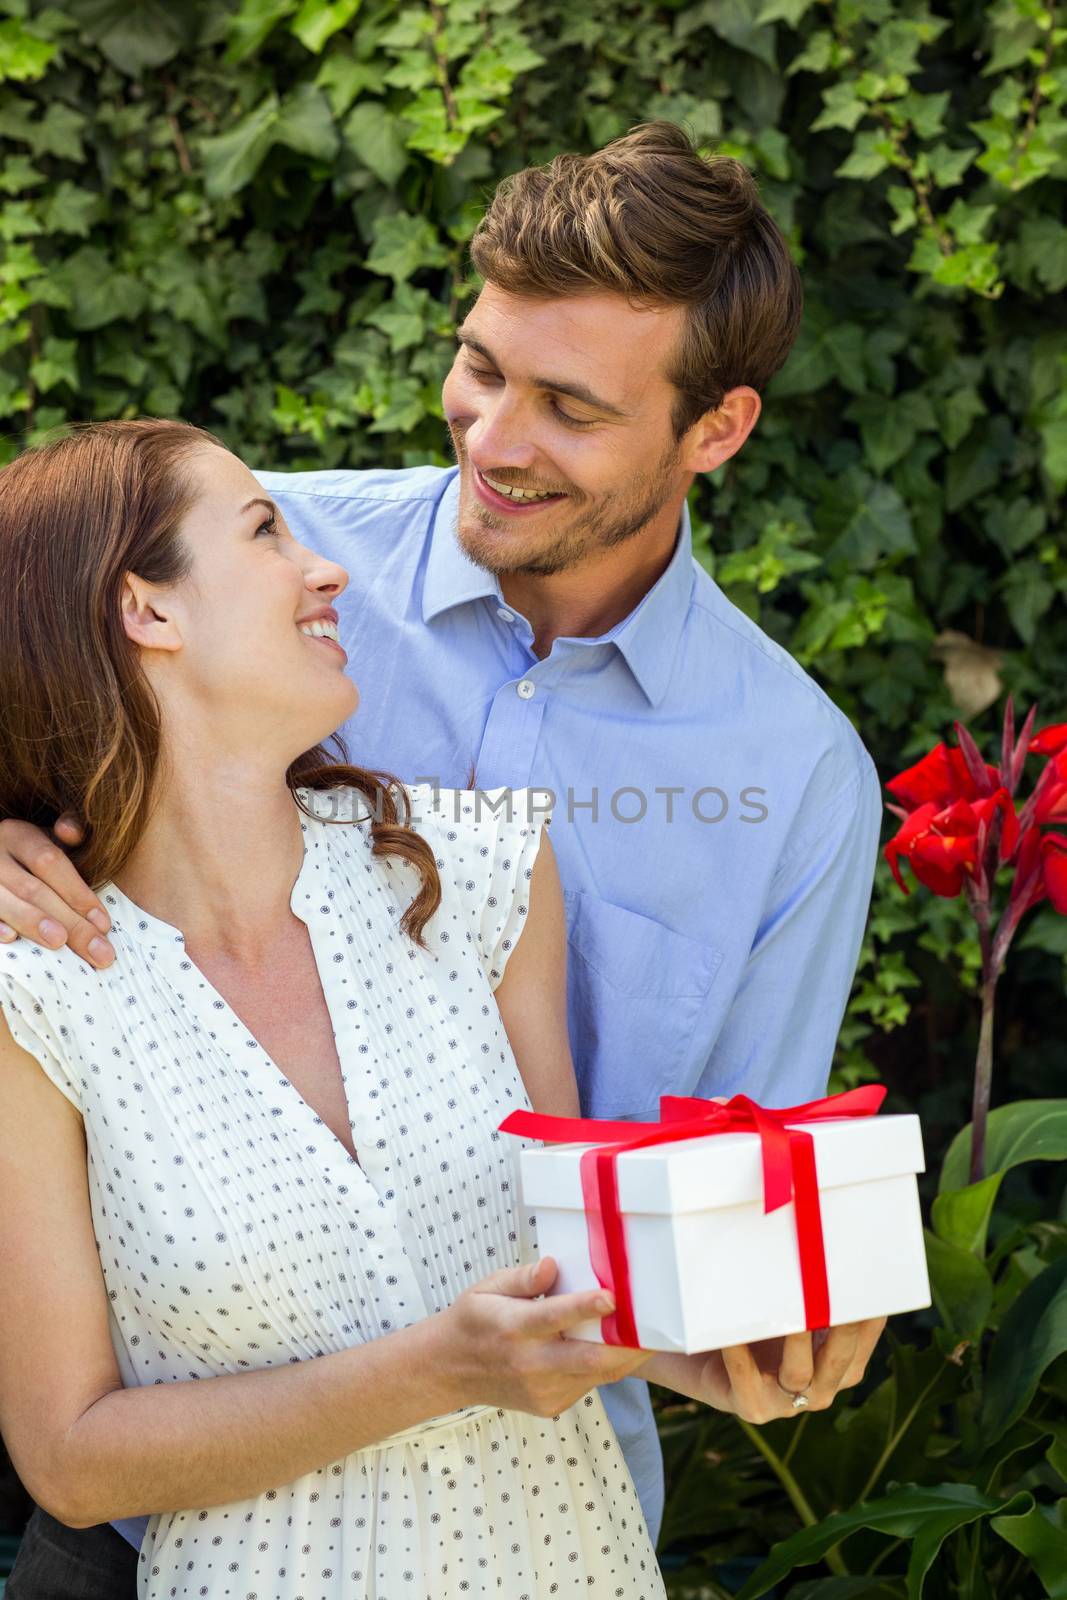 Romantic man giving gift to woman by Wavebreakmedia